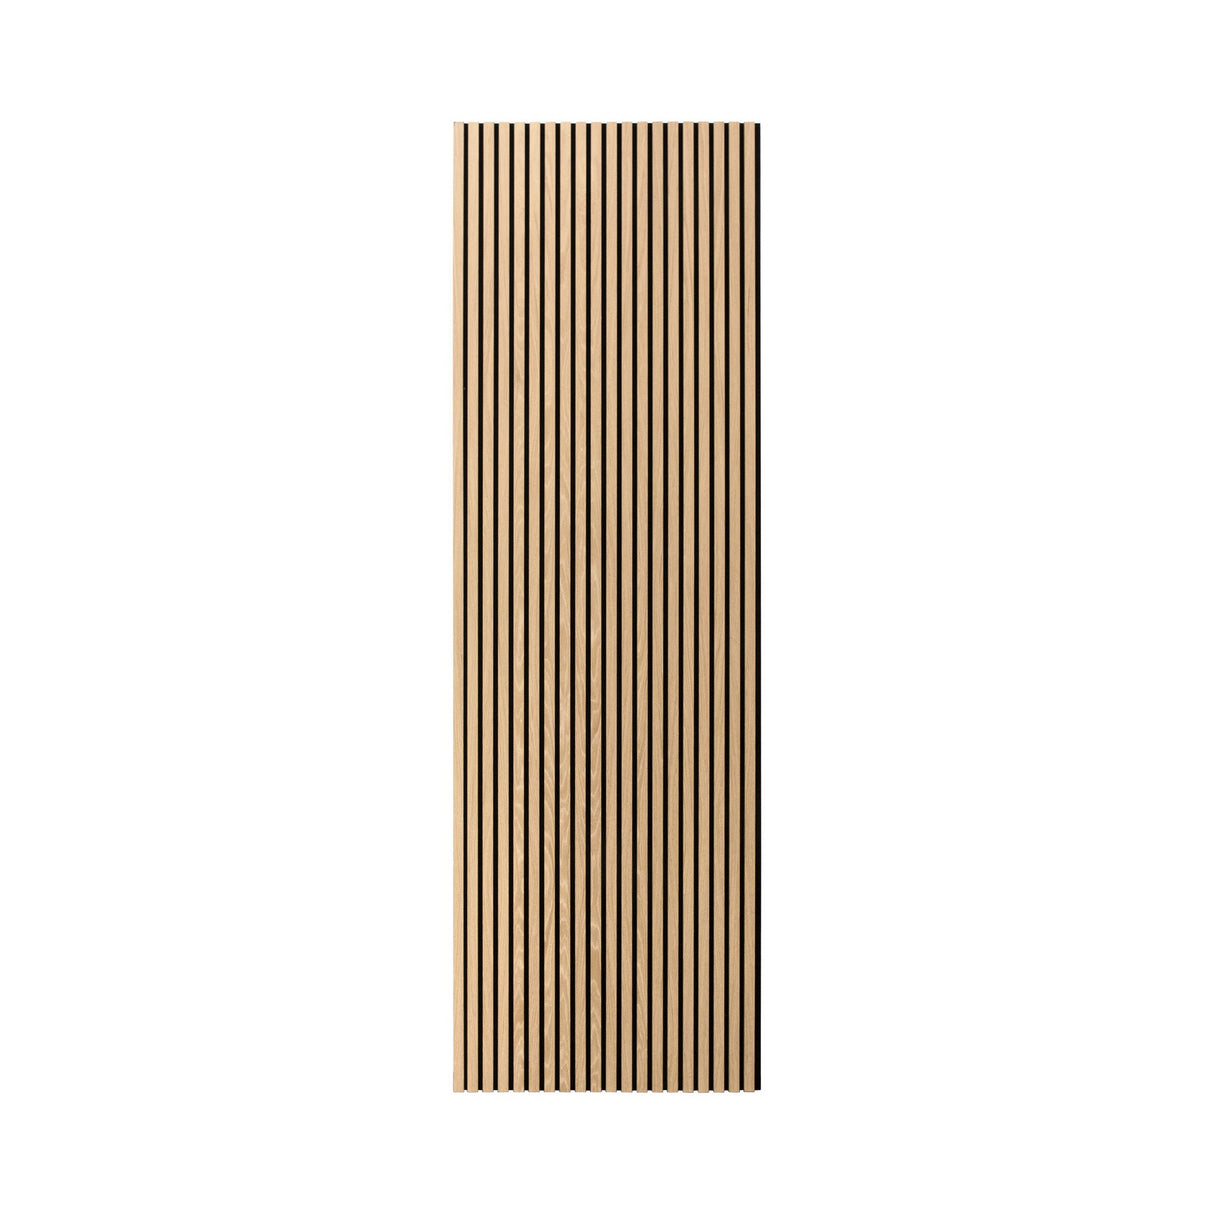 Primacoustic ECOScapes Slat Wall Panel, 32 x 96-Inch, Pine 2-Pack